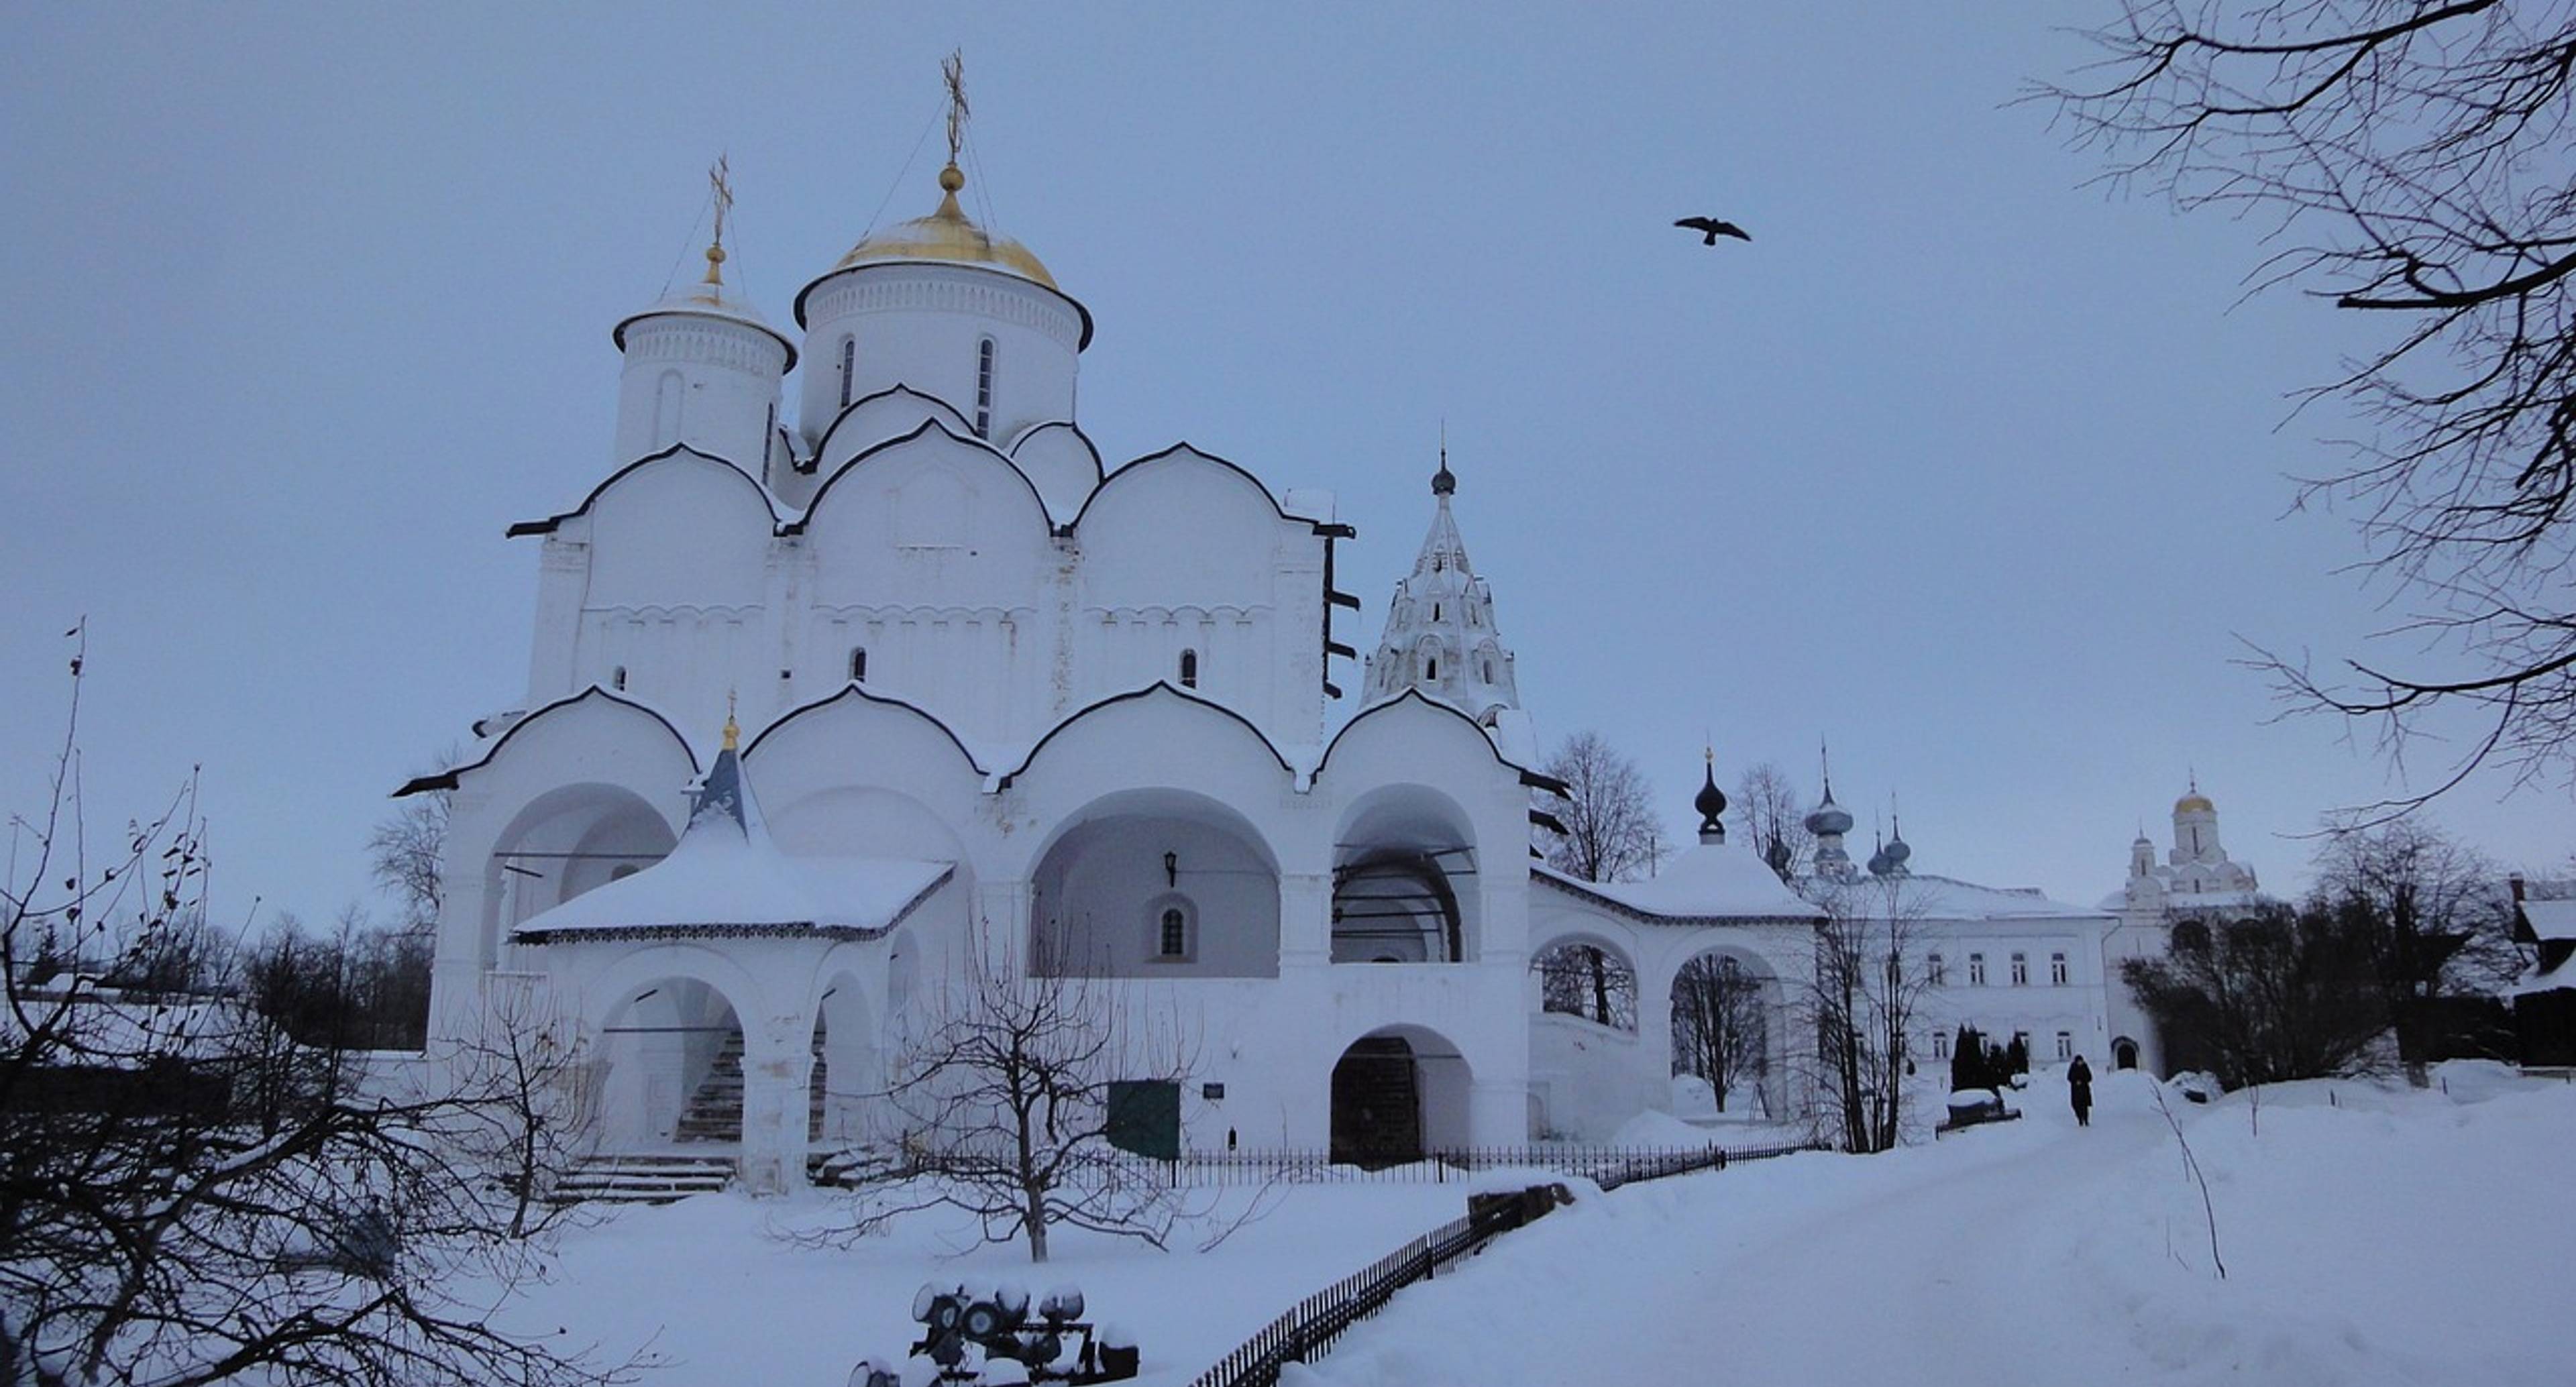 Suzdal - simple, but not boring